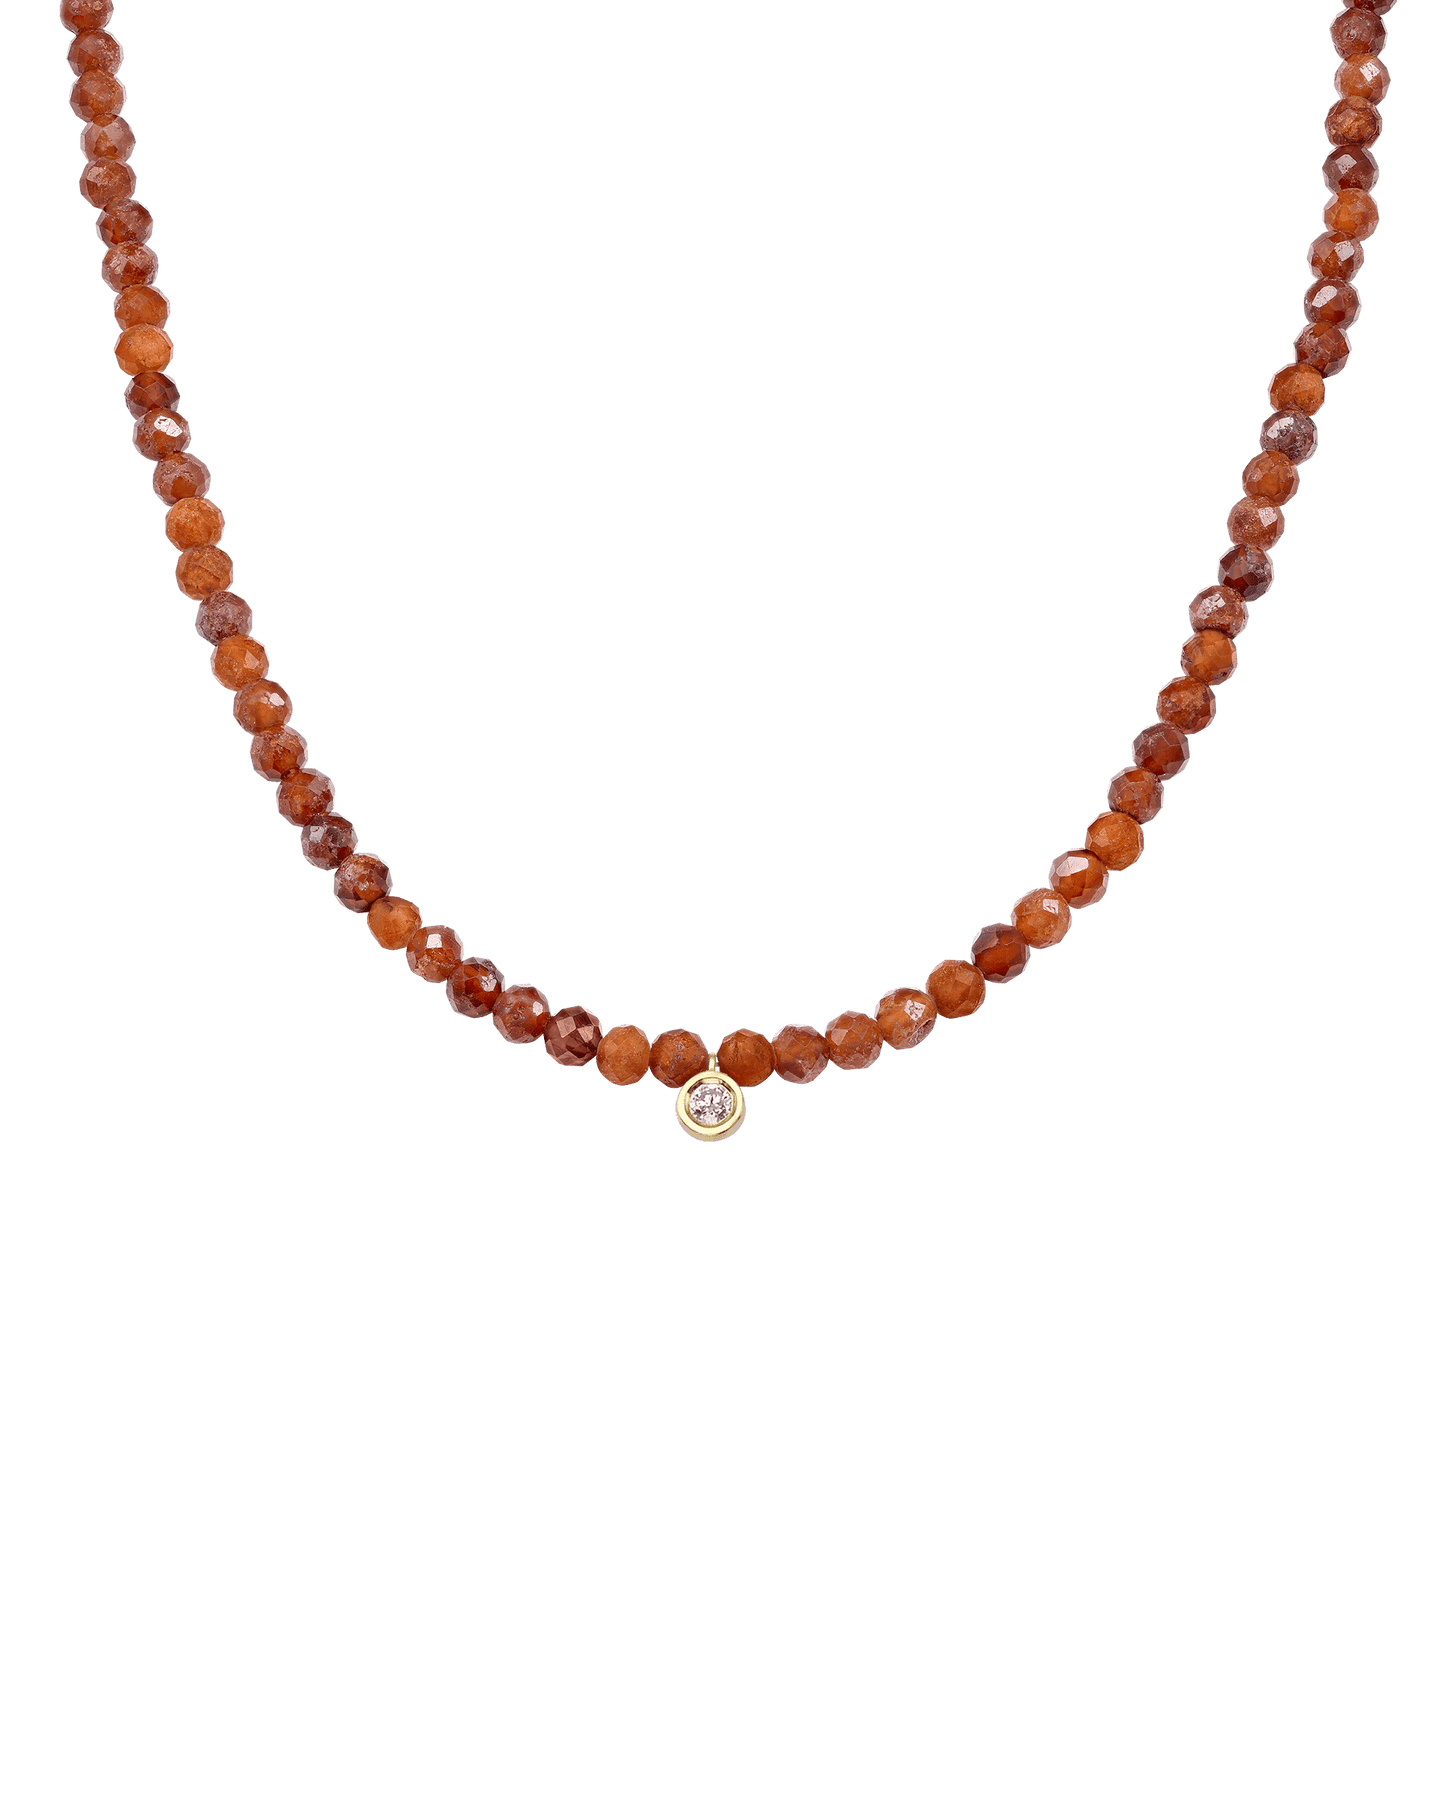 Sets of Stardust Initial Tag & Gemstone & Diamond Necklaces - 14K Rose Gold Necklaces 14K Solid Gold 6 Tags Medium: 0.04ct 